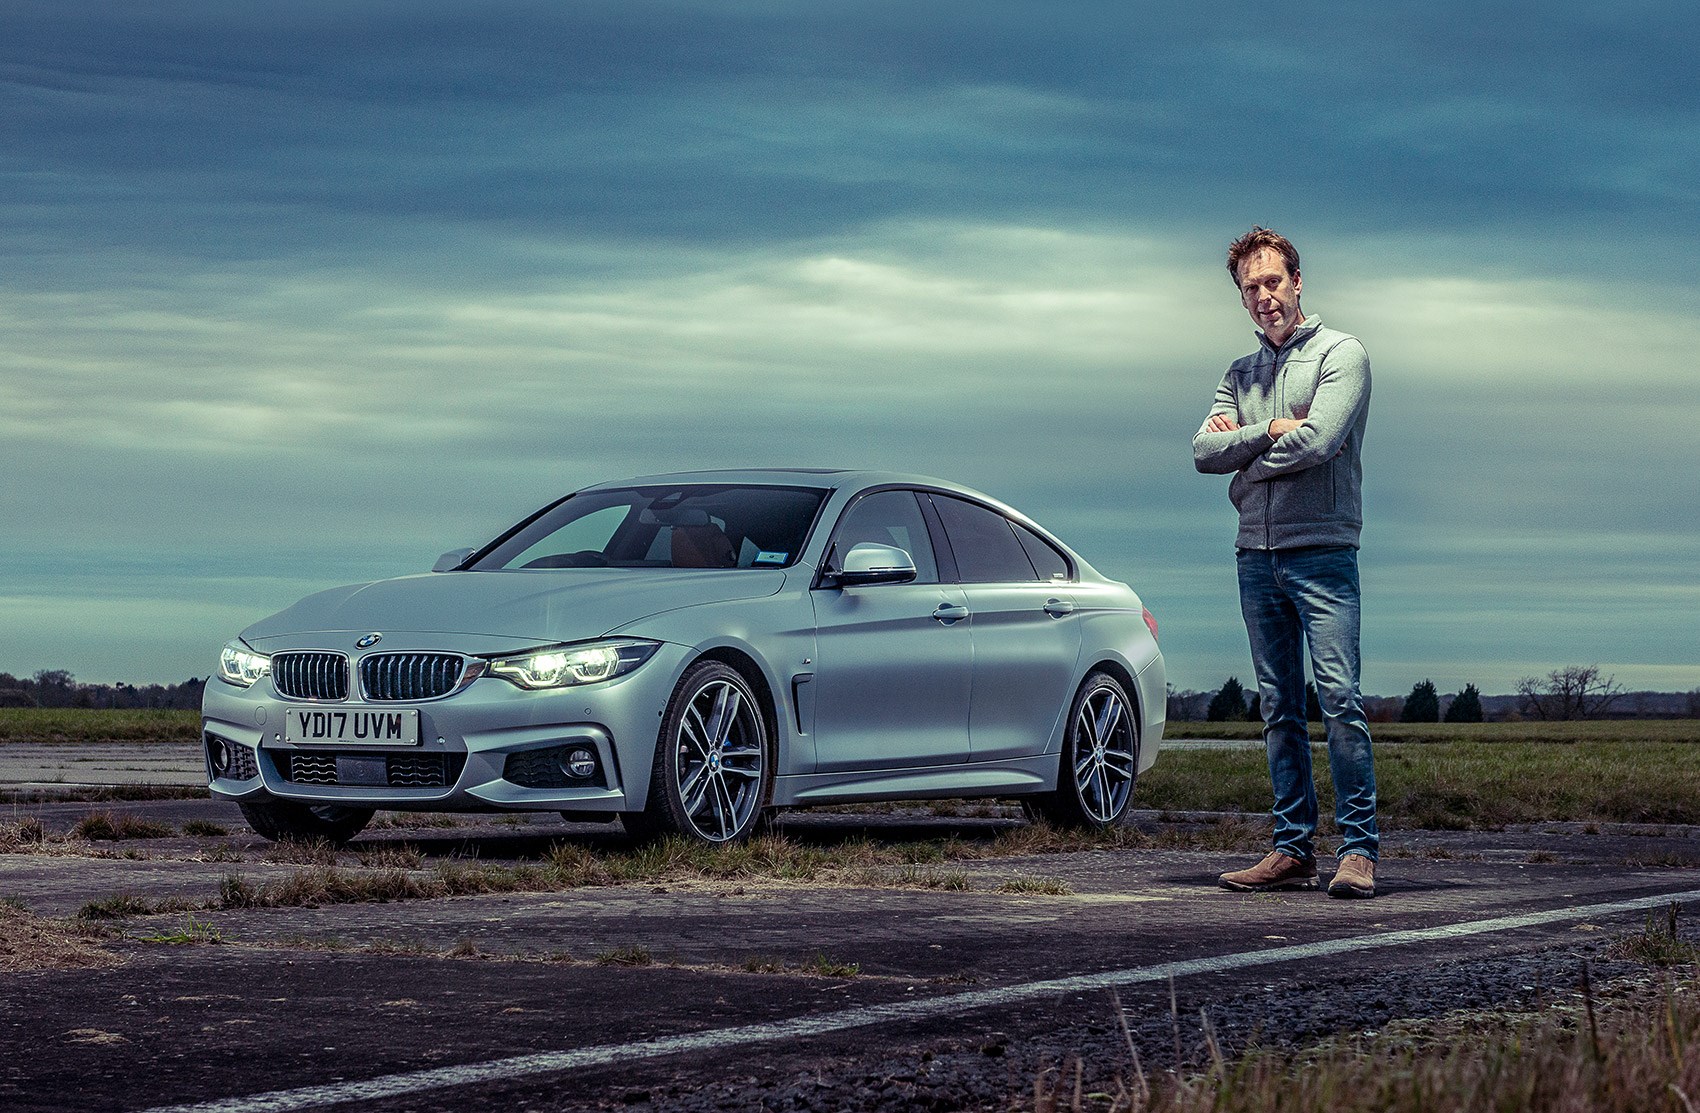 BMW 4-series Gran Coupe long-term test review: living with a 440i